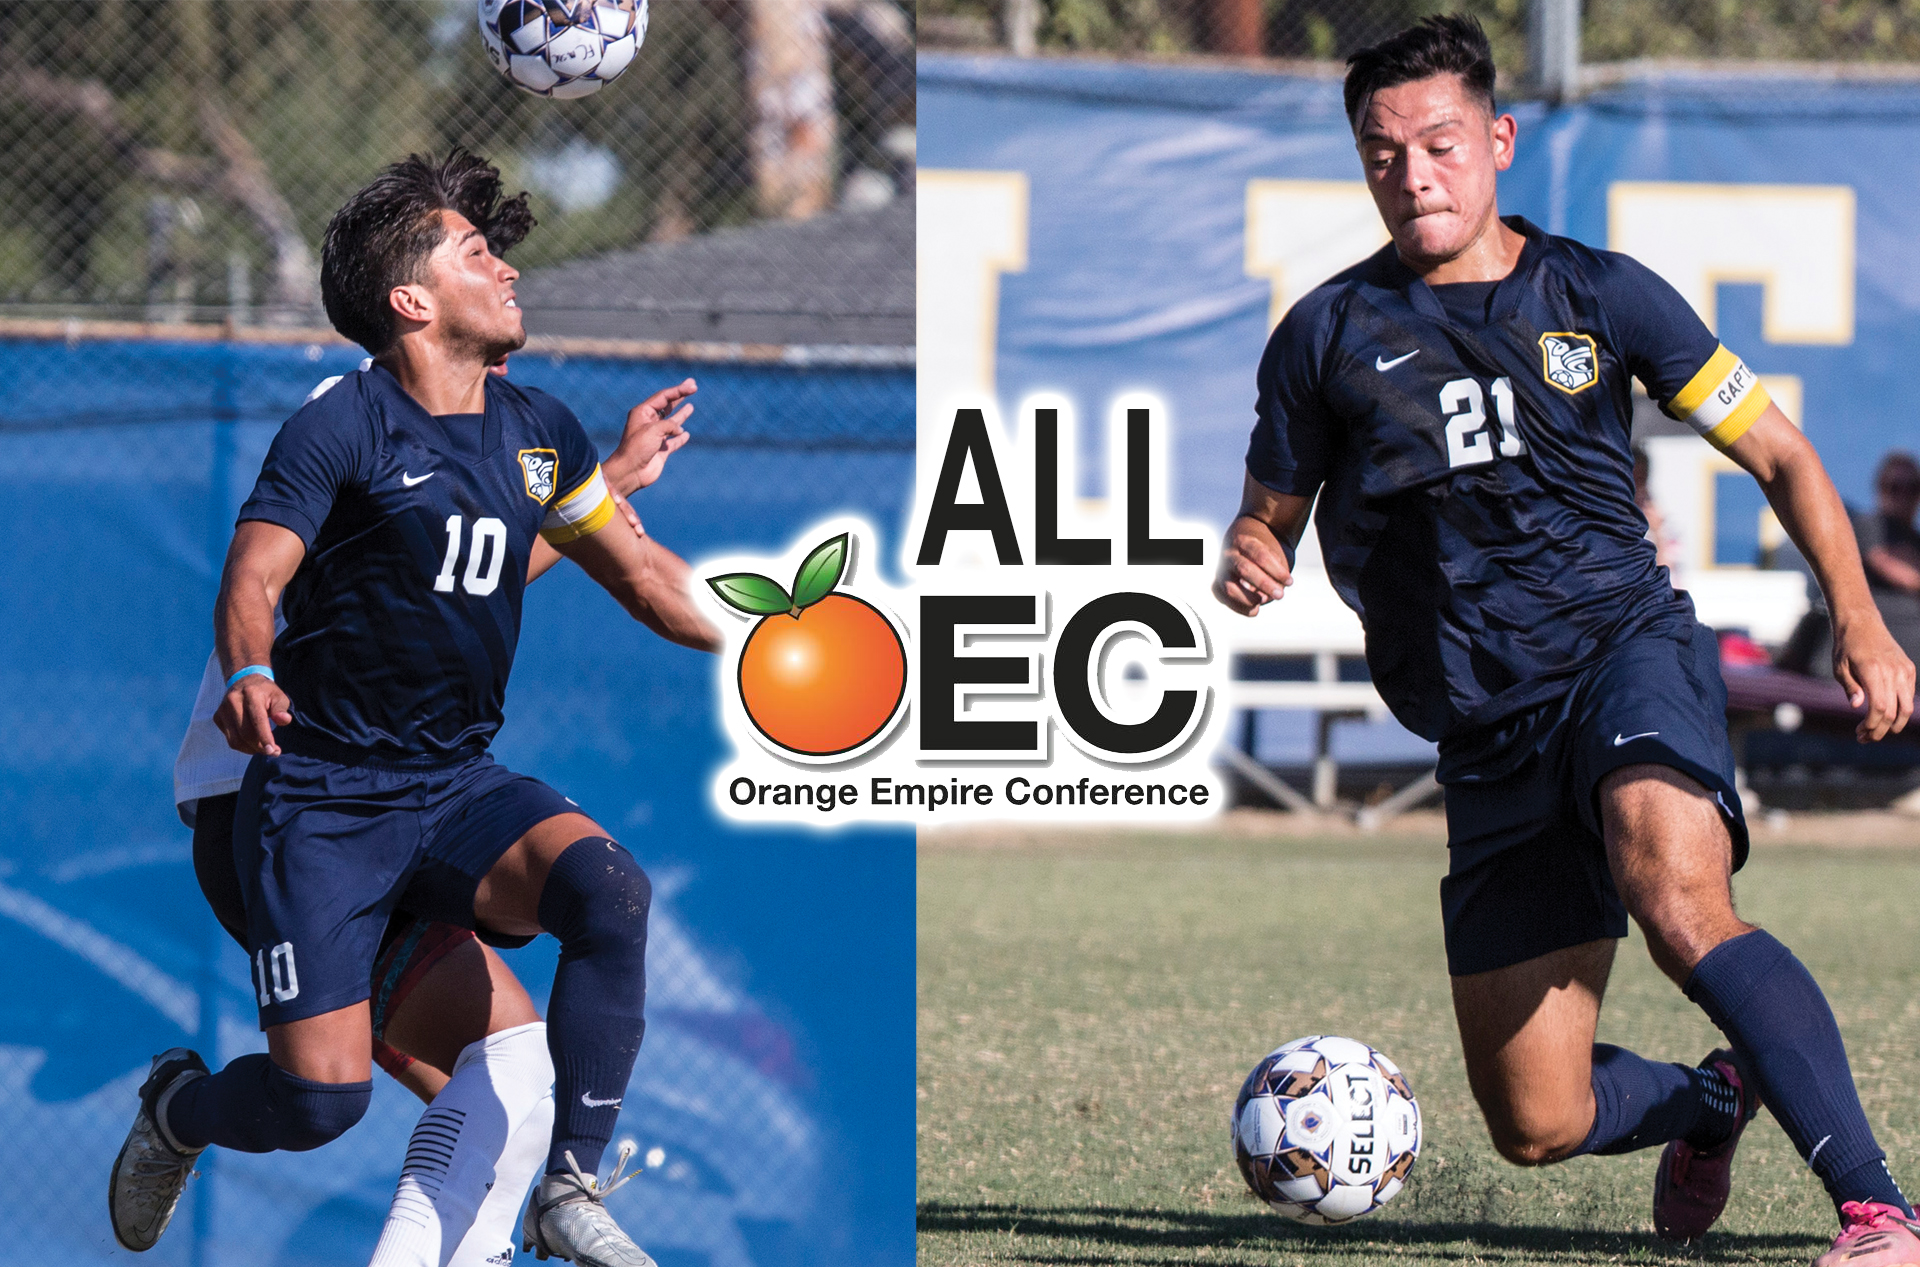 Images Steve Perez and Ryan Meinardus in action with All-OEC logo in the middle.